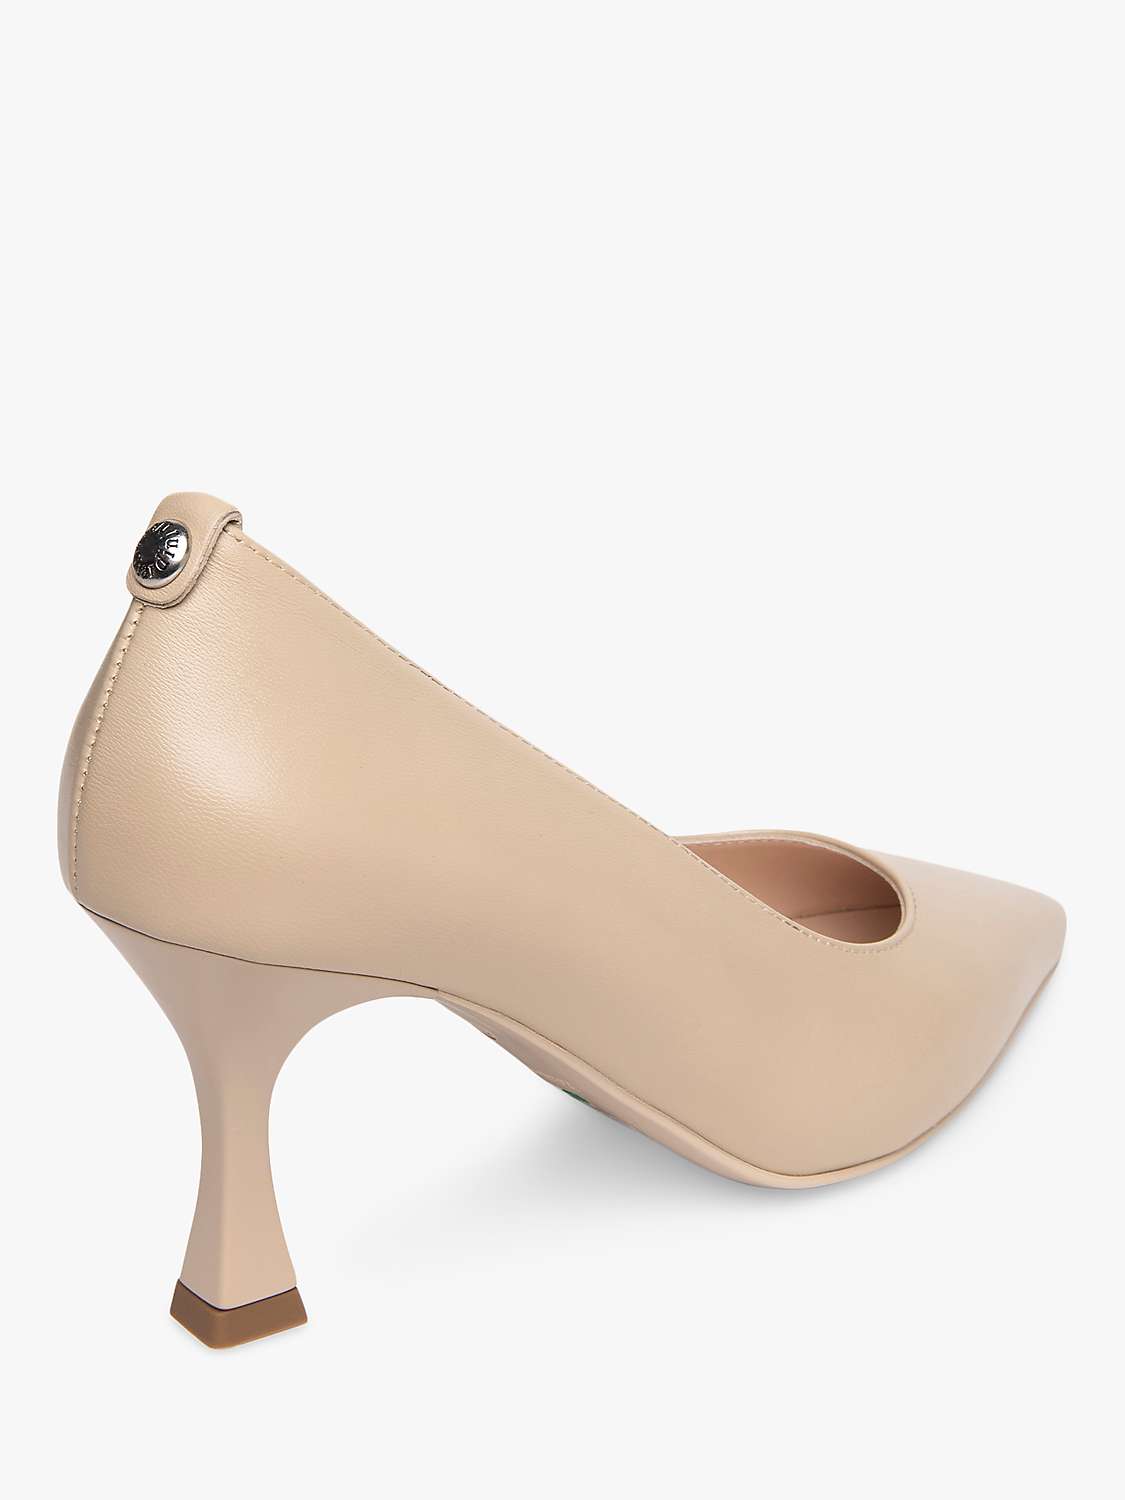 Buy NeroGiardini Leather Court Shoes Online at johnlewis.com